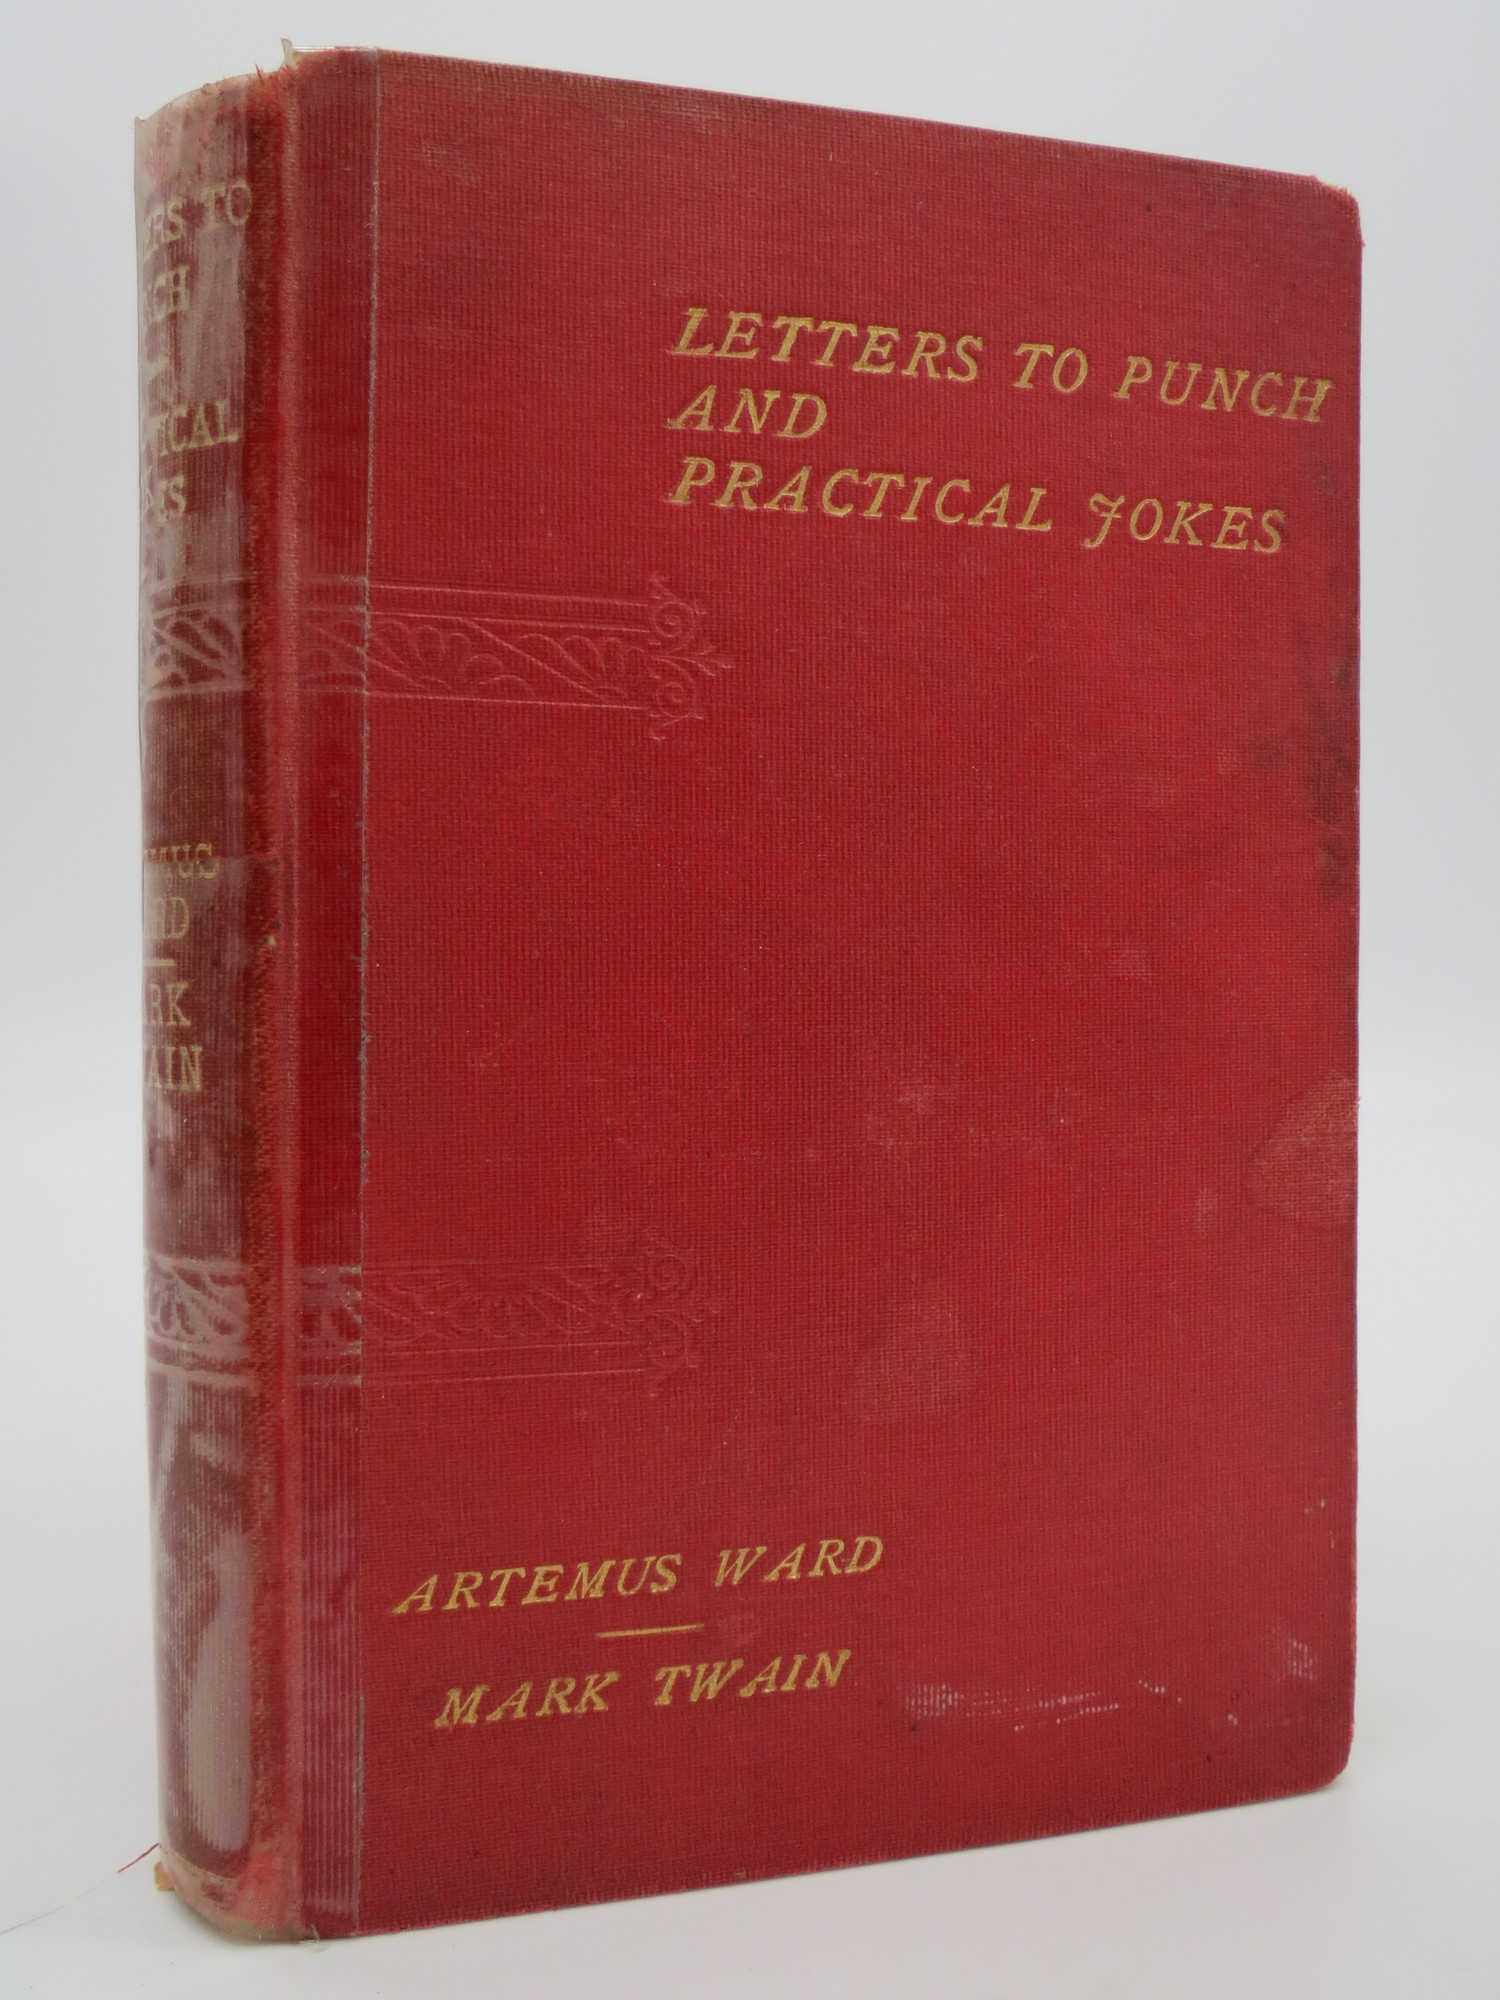 Image for LETTERS TO PUNCH AMONG THE WITCHES AND OTHER HUMOROUS PAPERS; PRACTICAL JOKES WITH ARTEMUS WARD INCLUDING THE STORY OF THE MAN WHO FOUGHT CATS